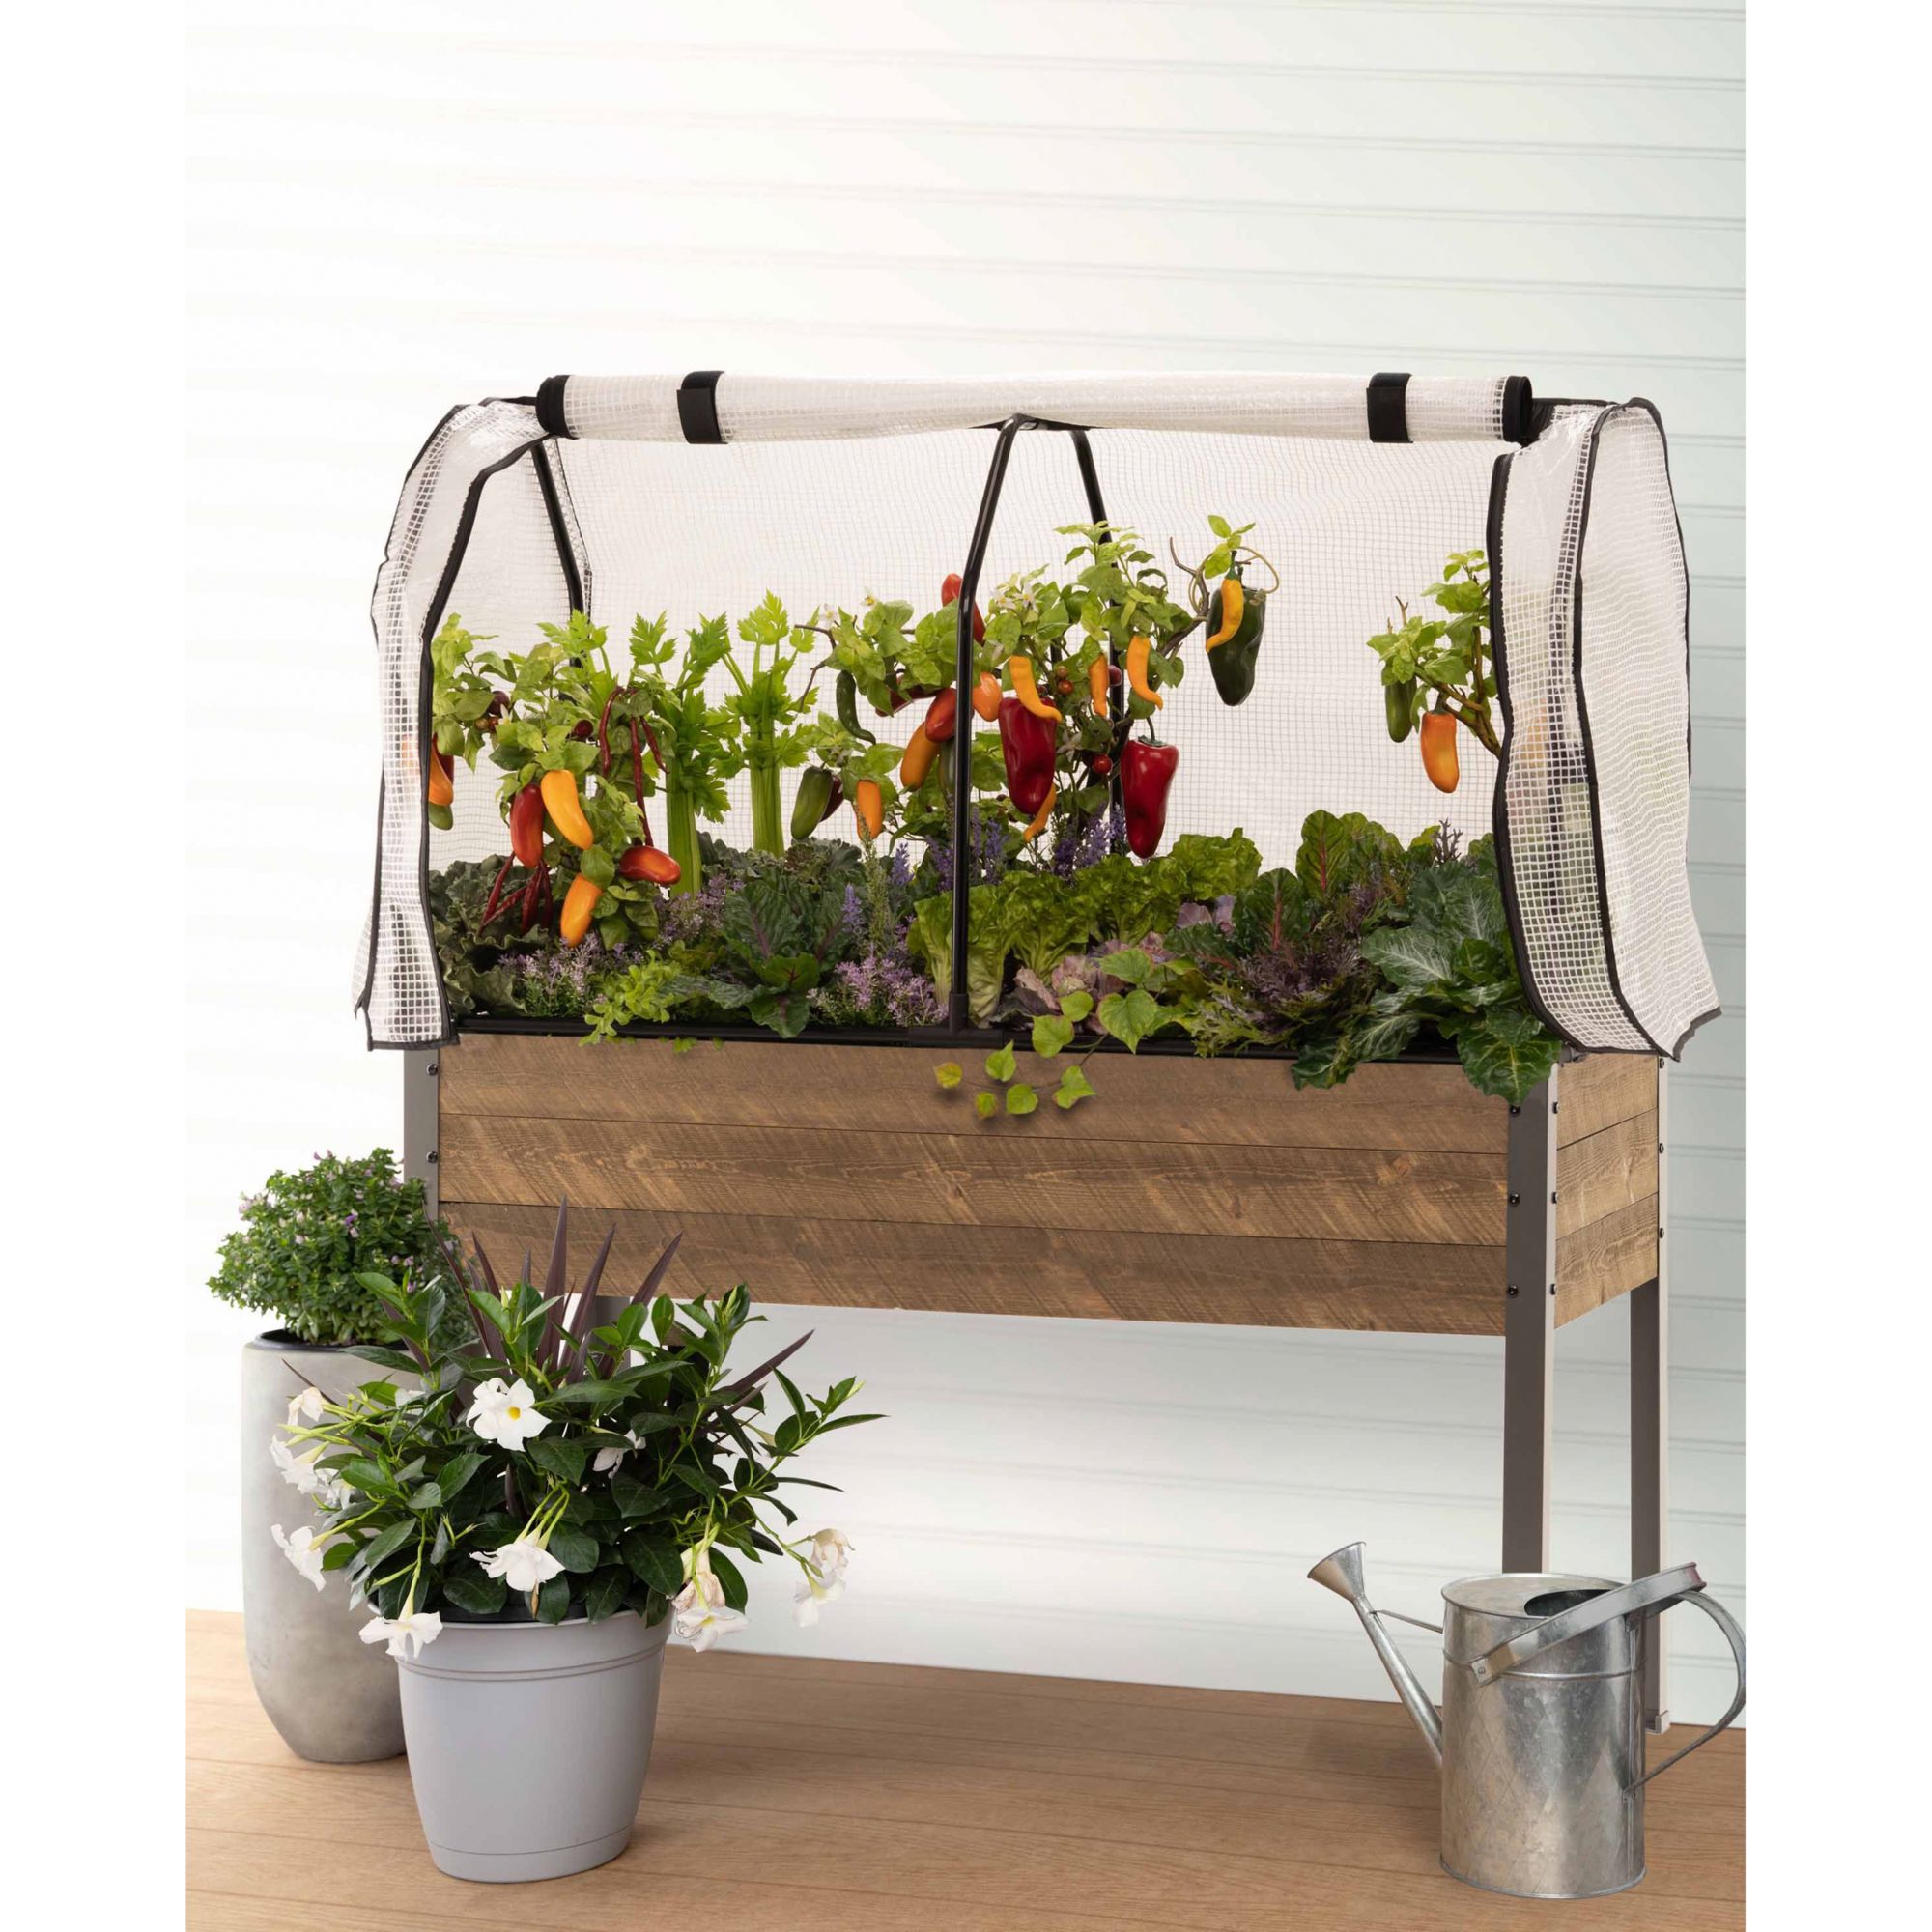 CedarCraft Elevated Spruce Planter with Greenhouse and Bug Covers - Brown